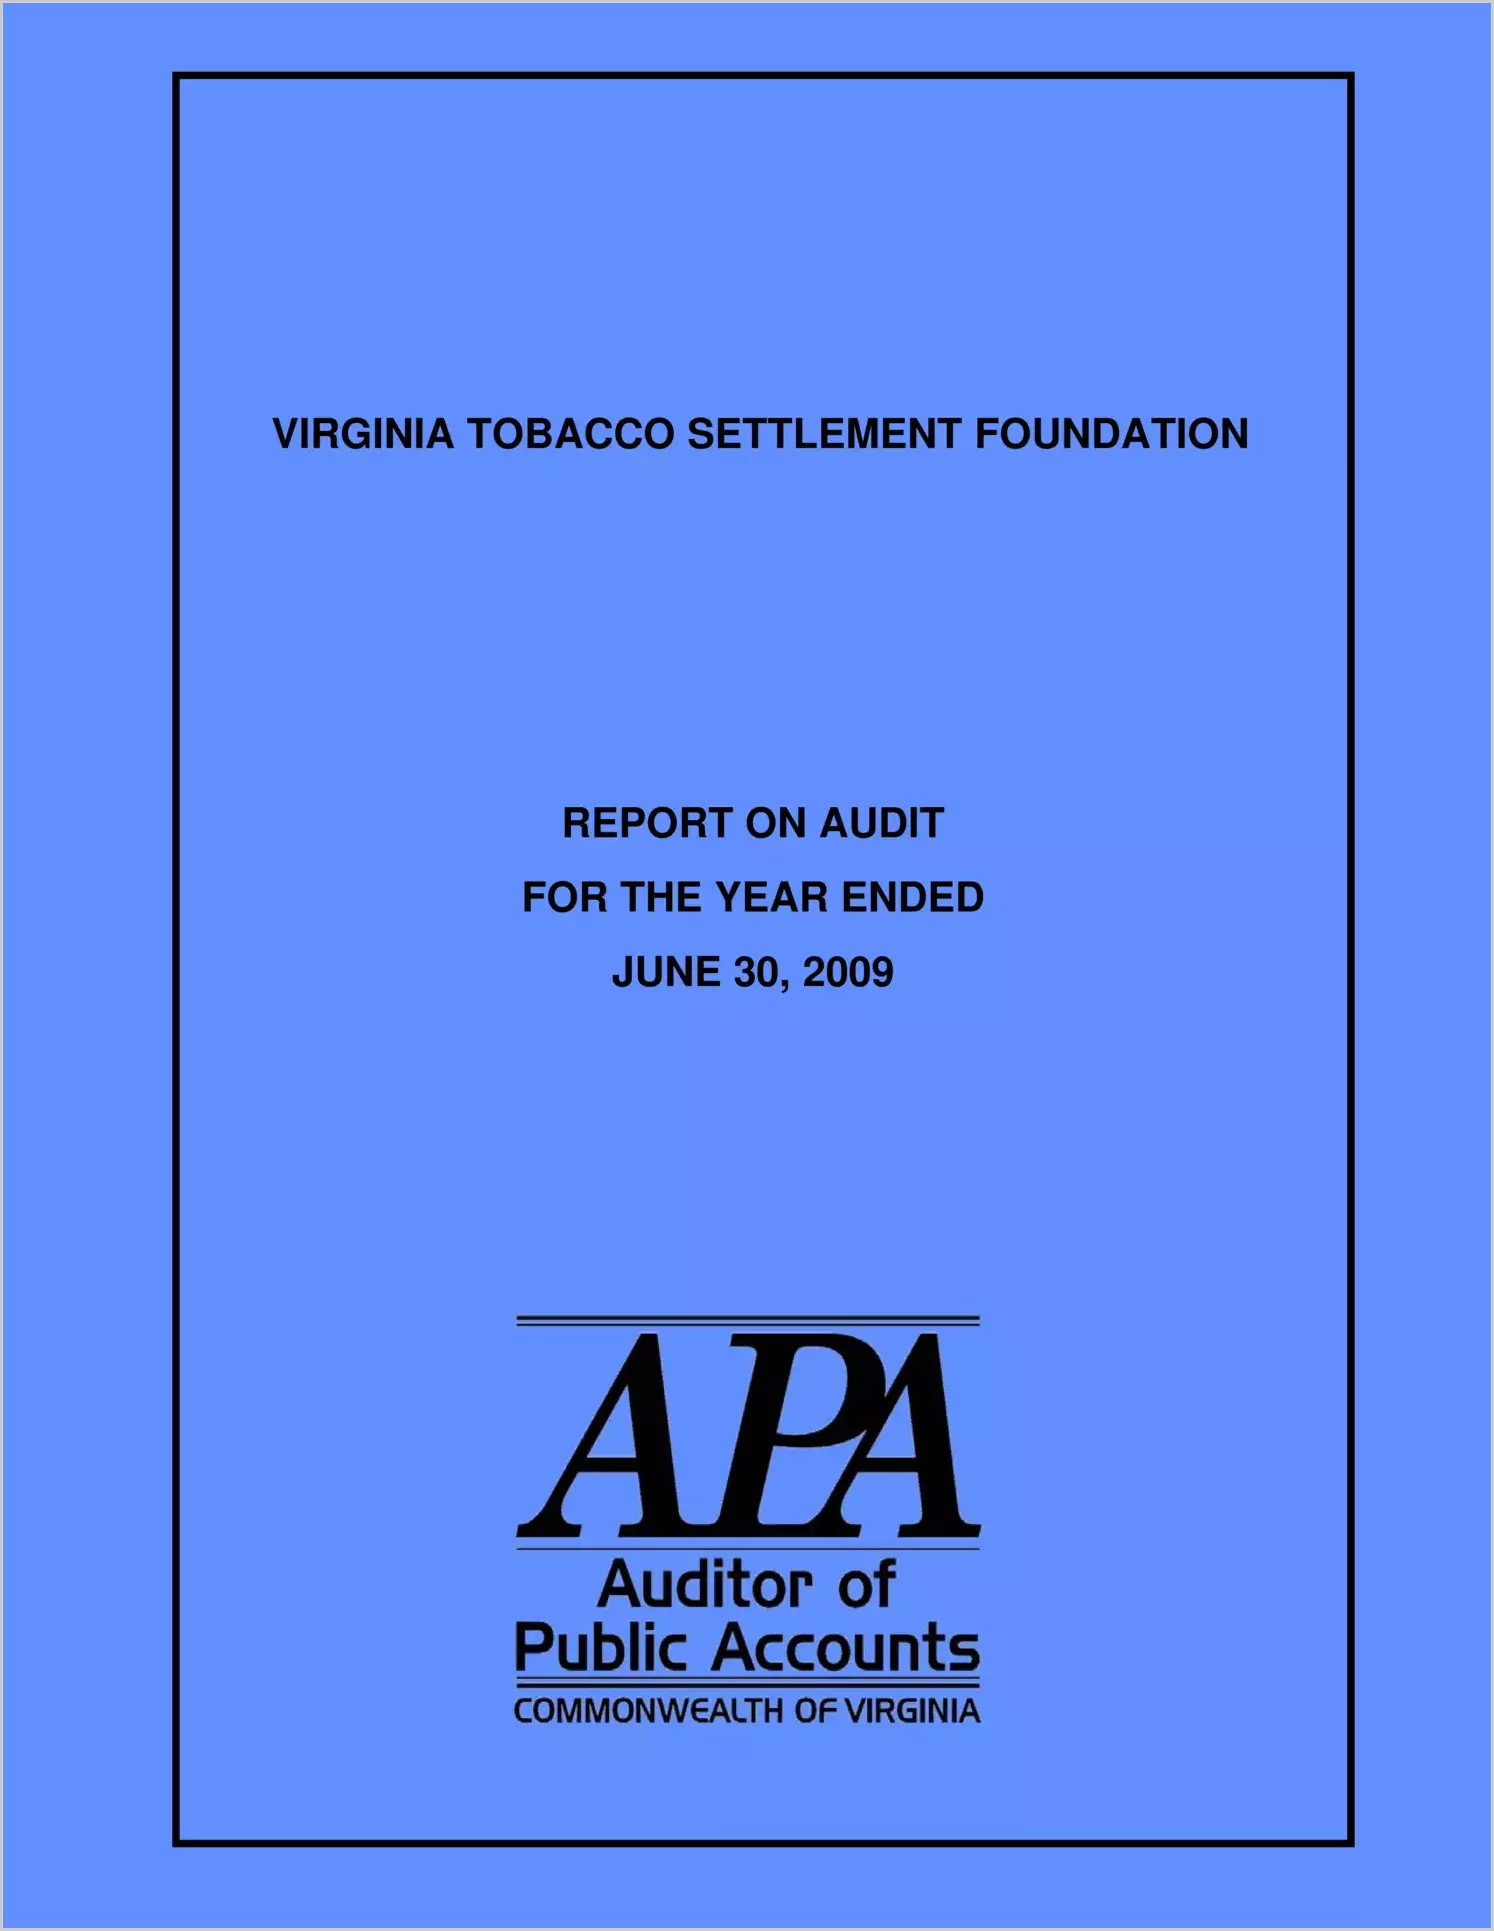 Virginia Tobacco Settlement Foundation for the year ended June 30, 2009